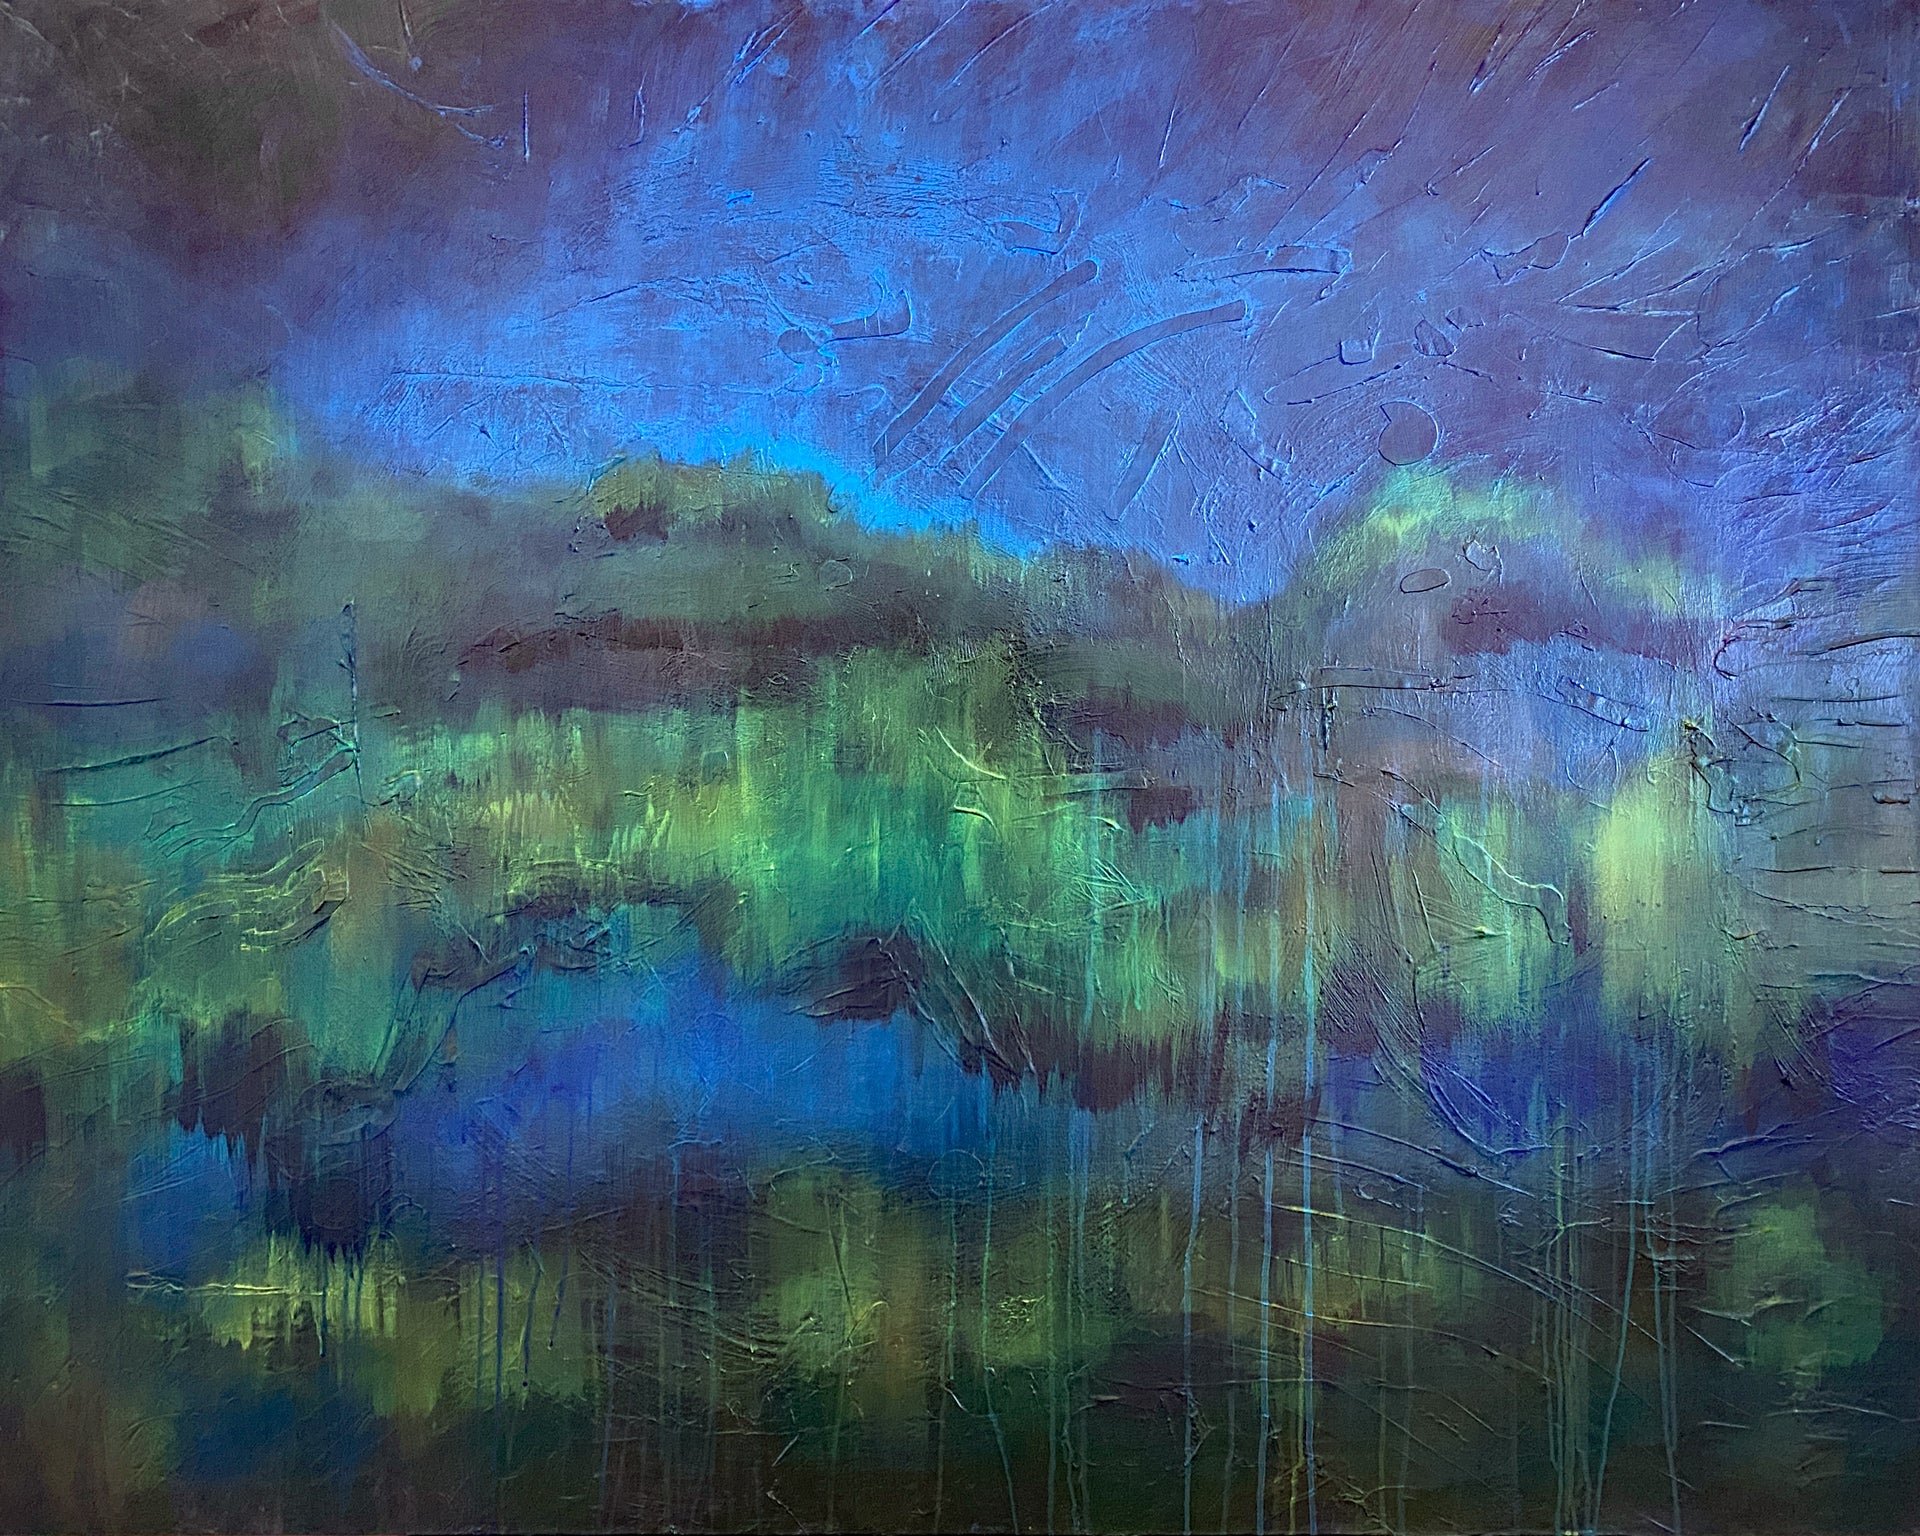 Translation of Nocturne Op. 33 - Homage to John Field Op. 33 (S. Barber) - Acrylic and Paper on Canvas